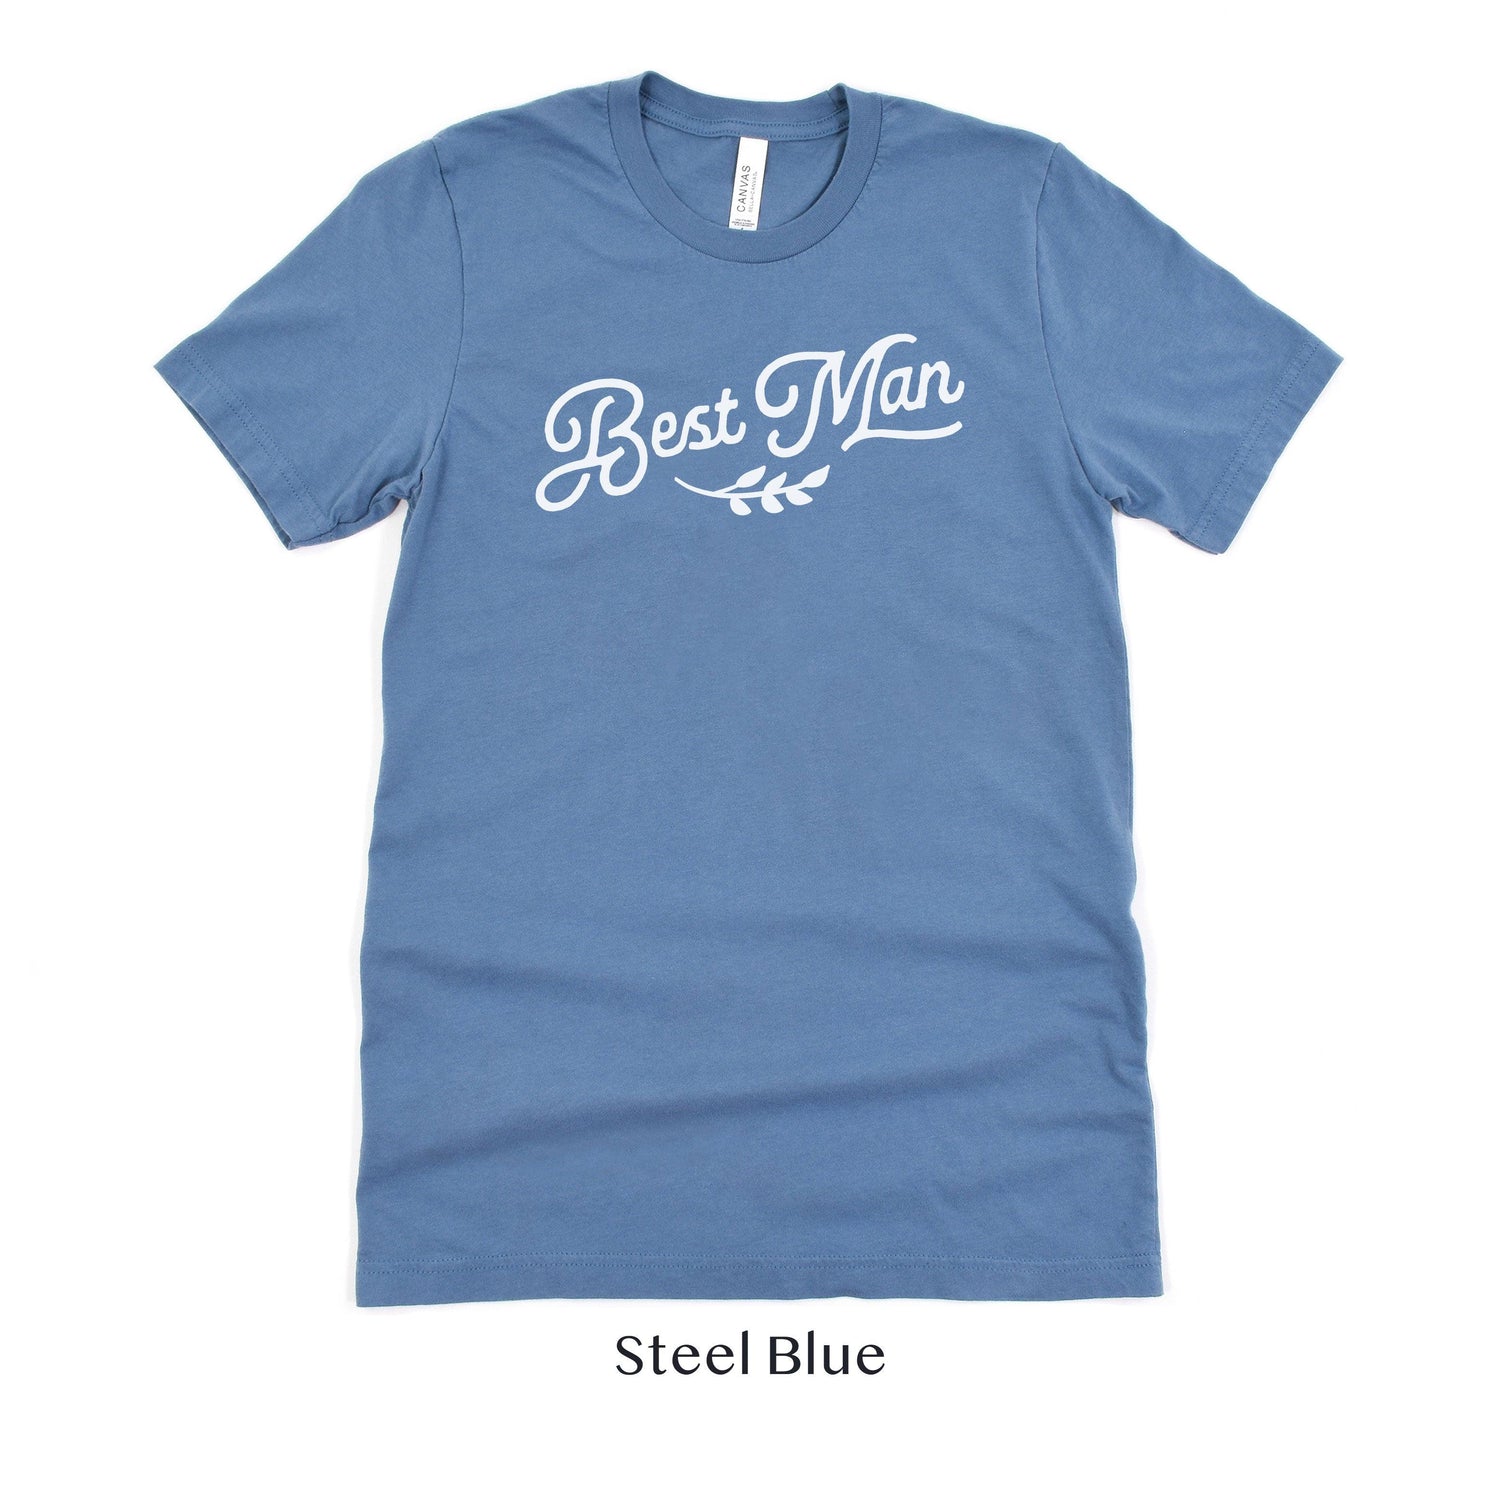 Best Man Short-Sleeve Tee - Small-5x Sizes Available by Oaklynn Lane - Steel Blue Shirt